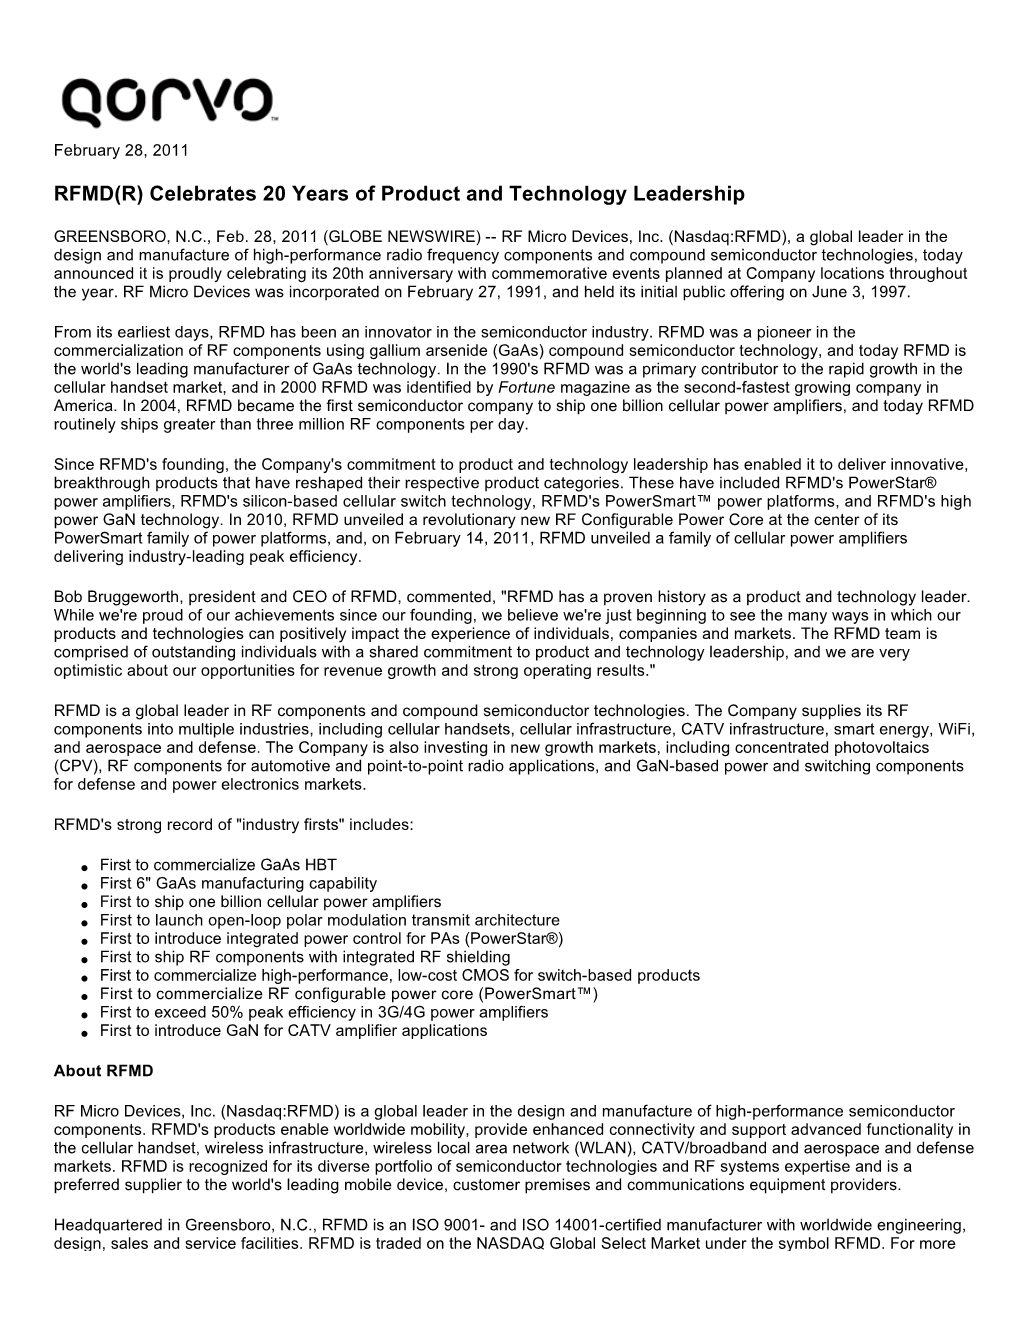 RFMD(R) Celebrates 20 Years of Product and Technology Leadership